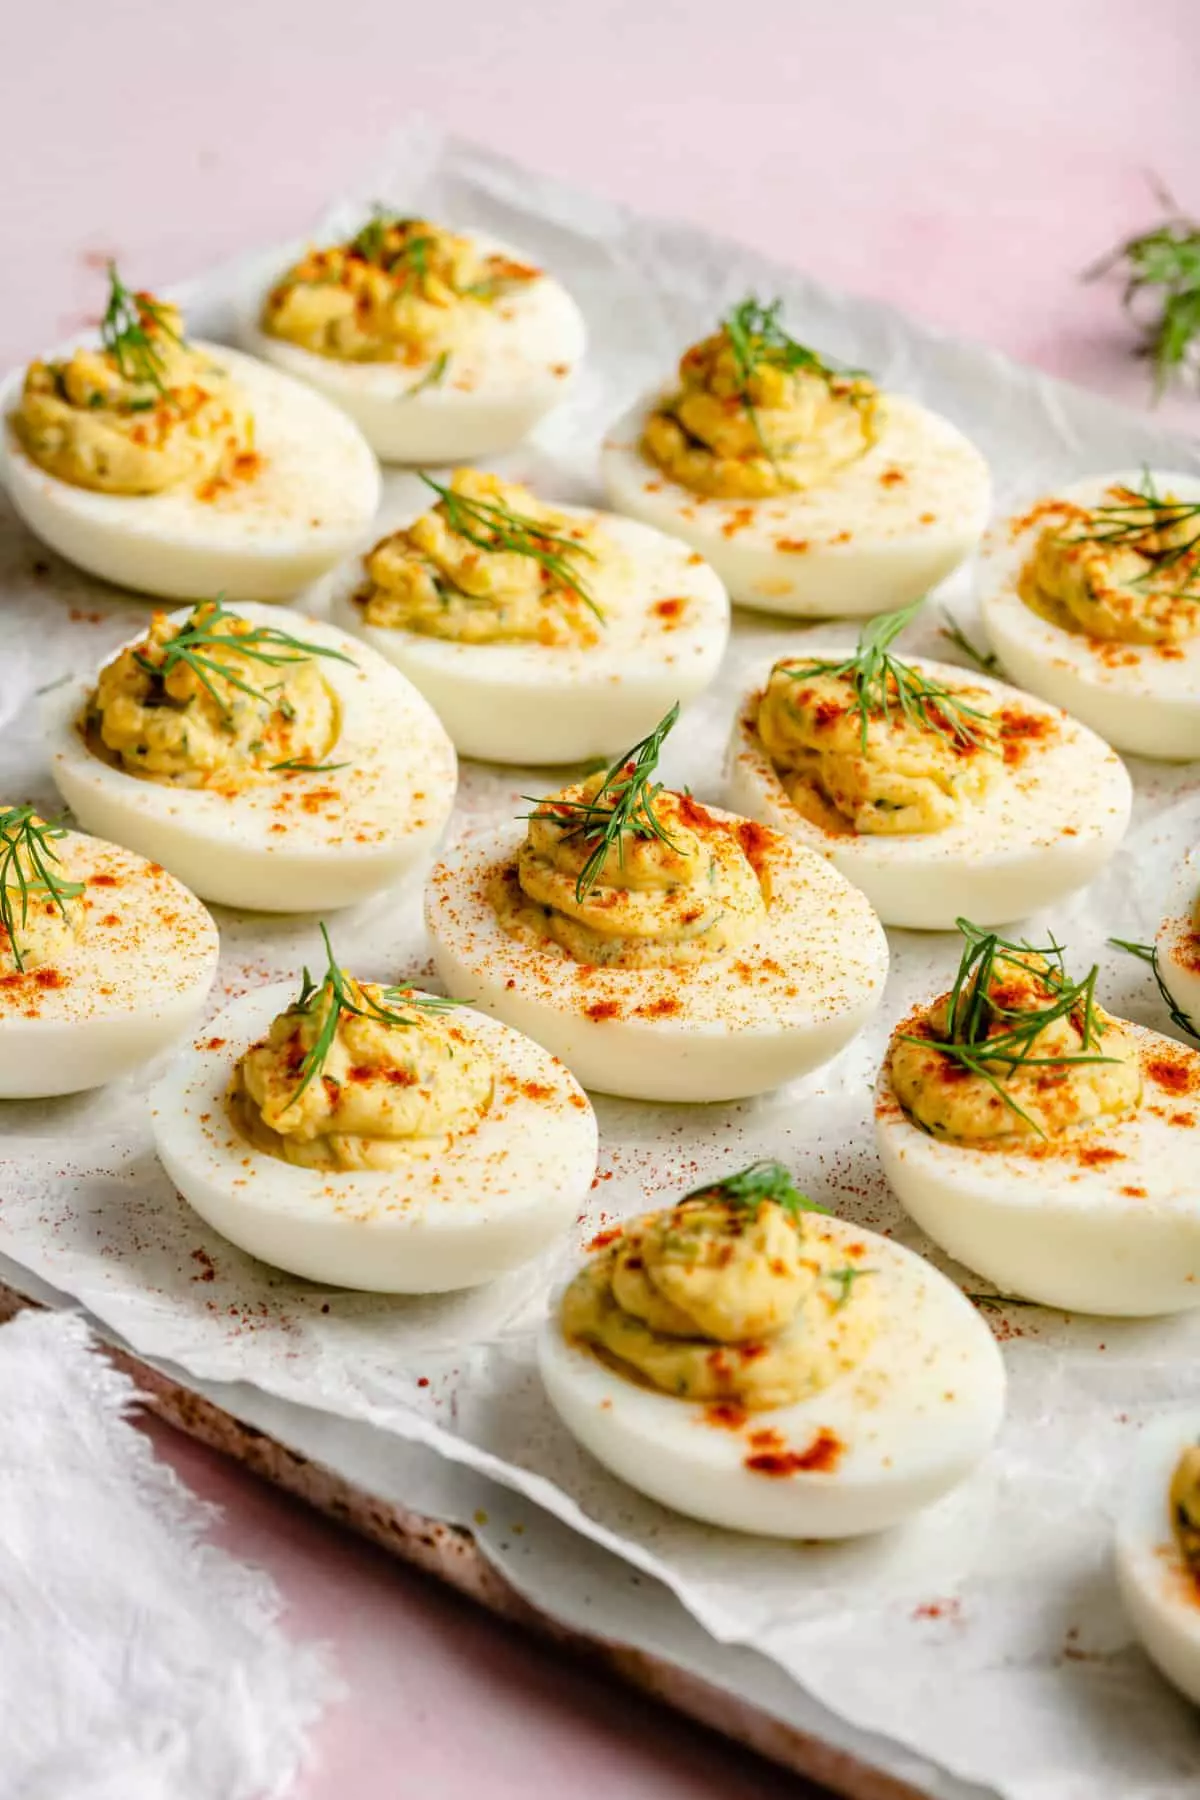 24. Deviled Eggs by The Defined Dish
